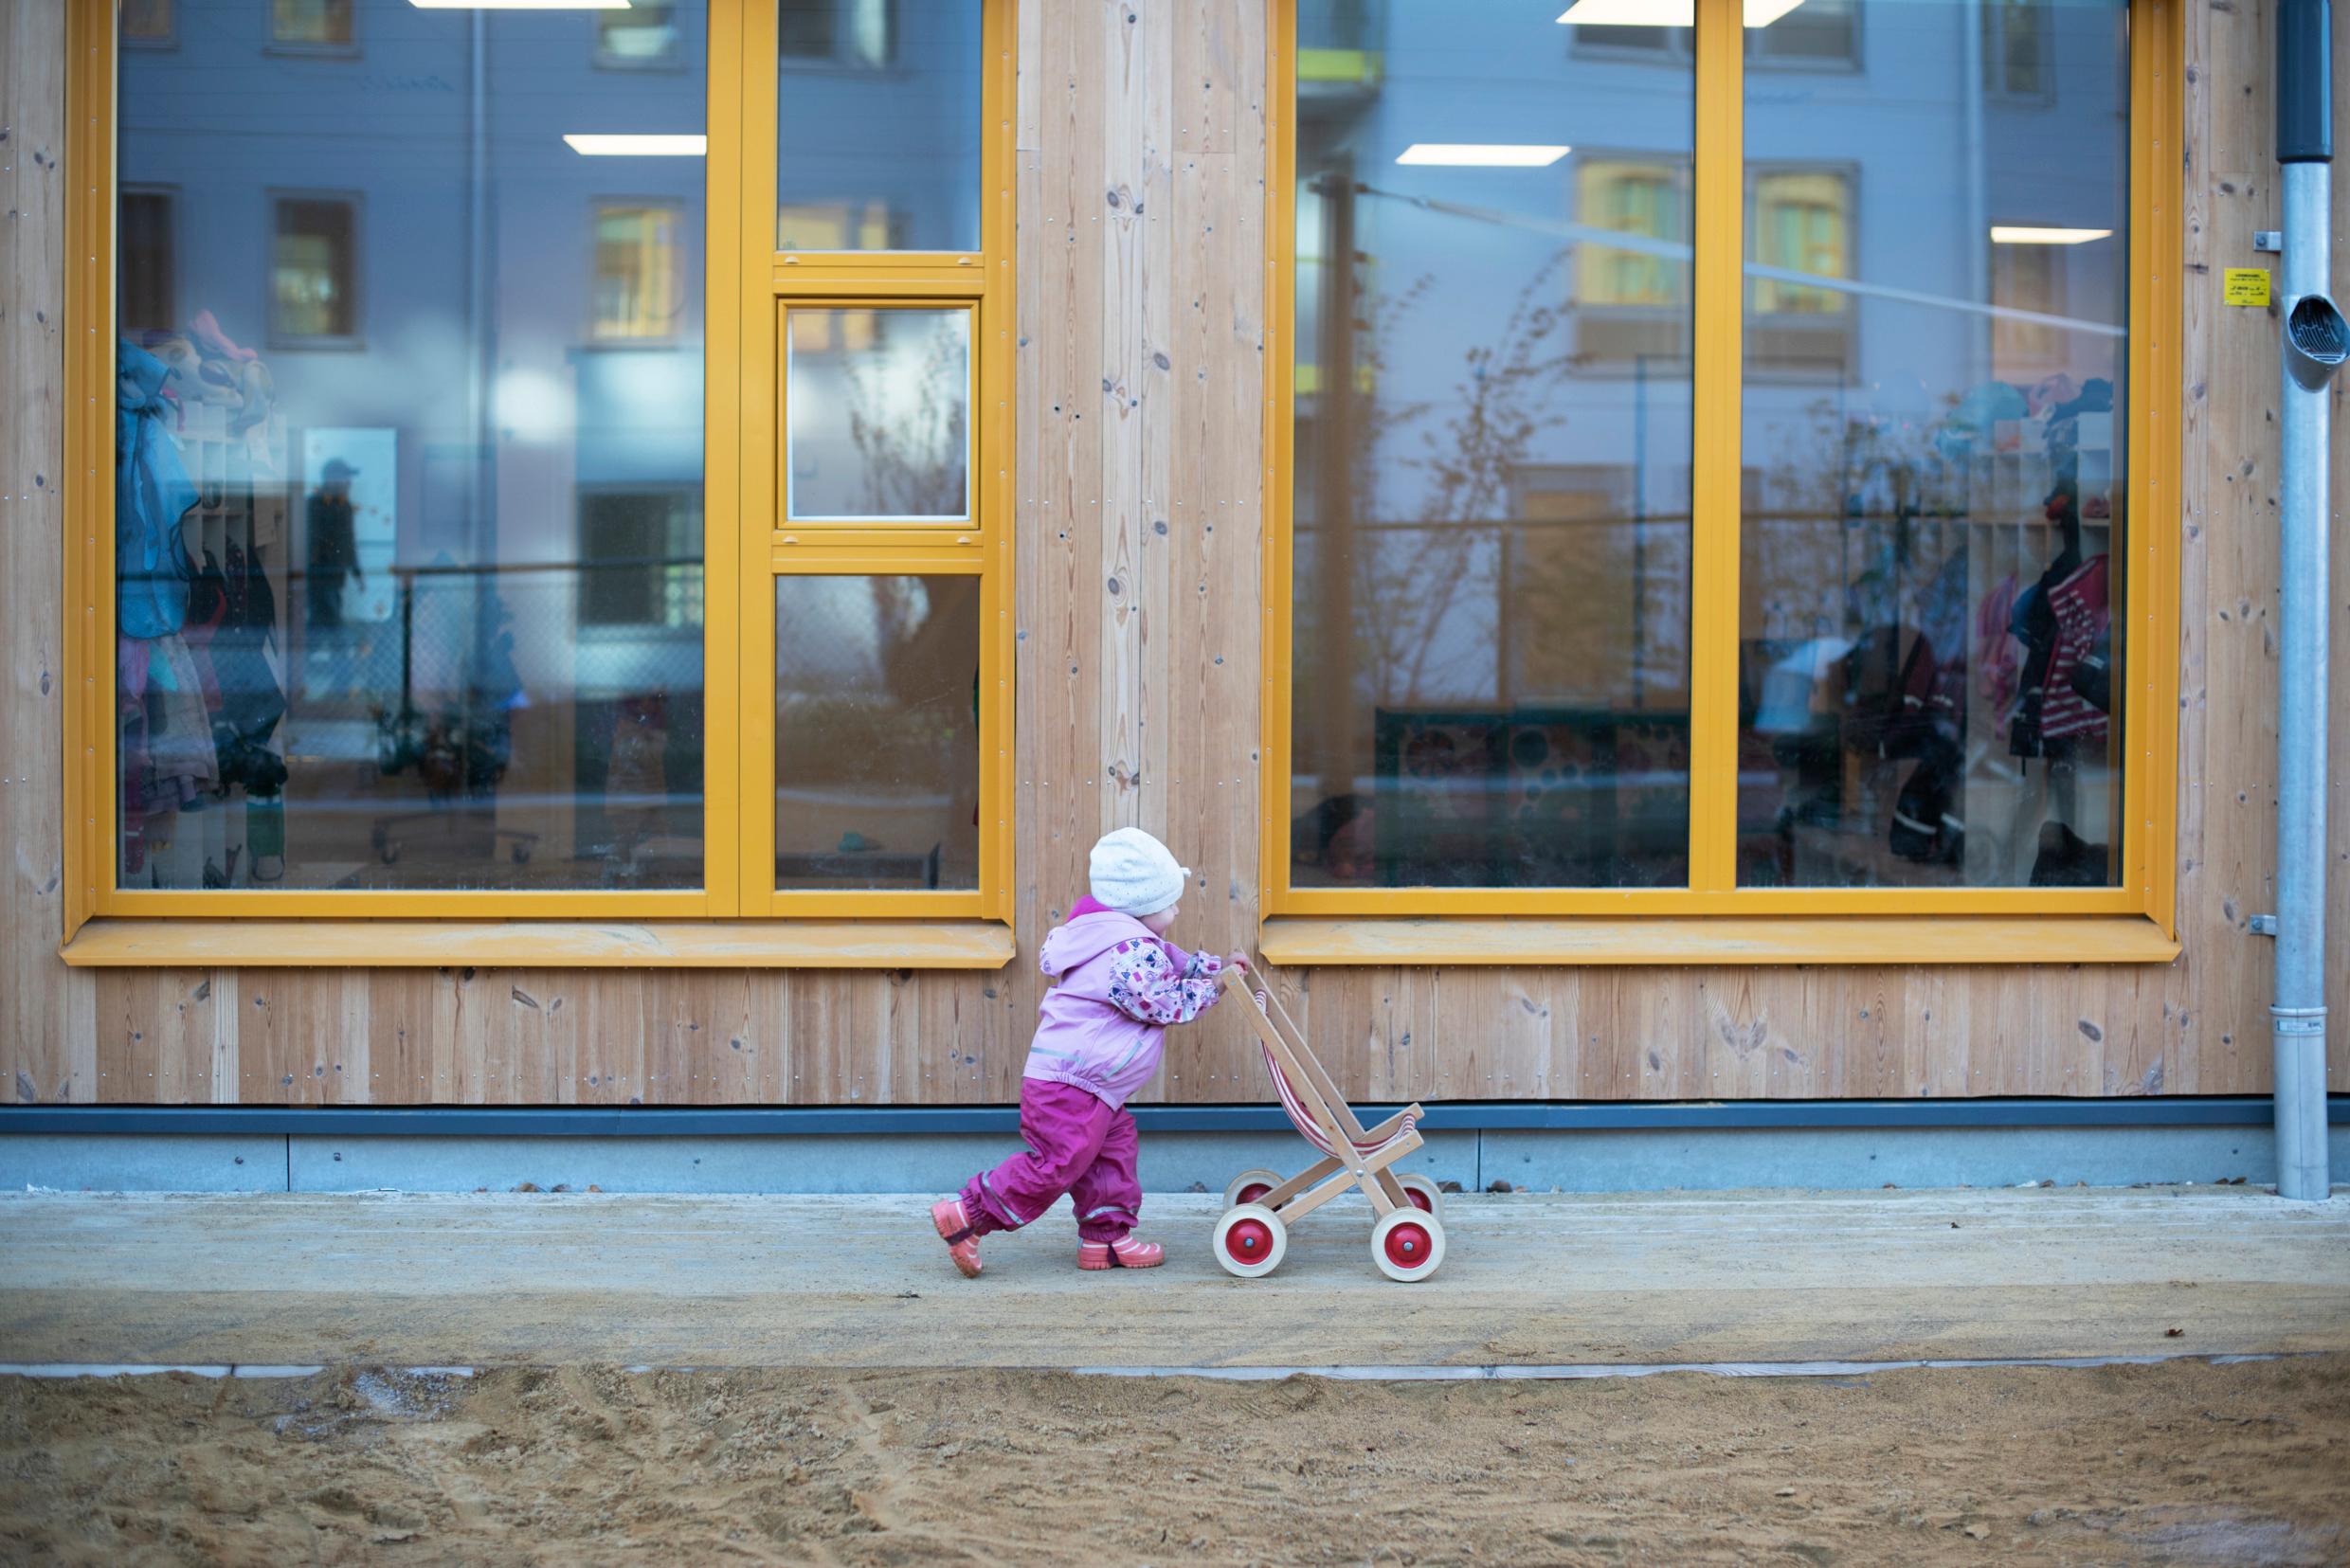 A toddler pushes a toy pram outside in front of a large window.